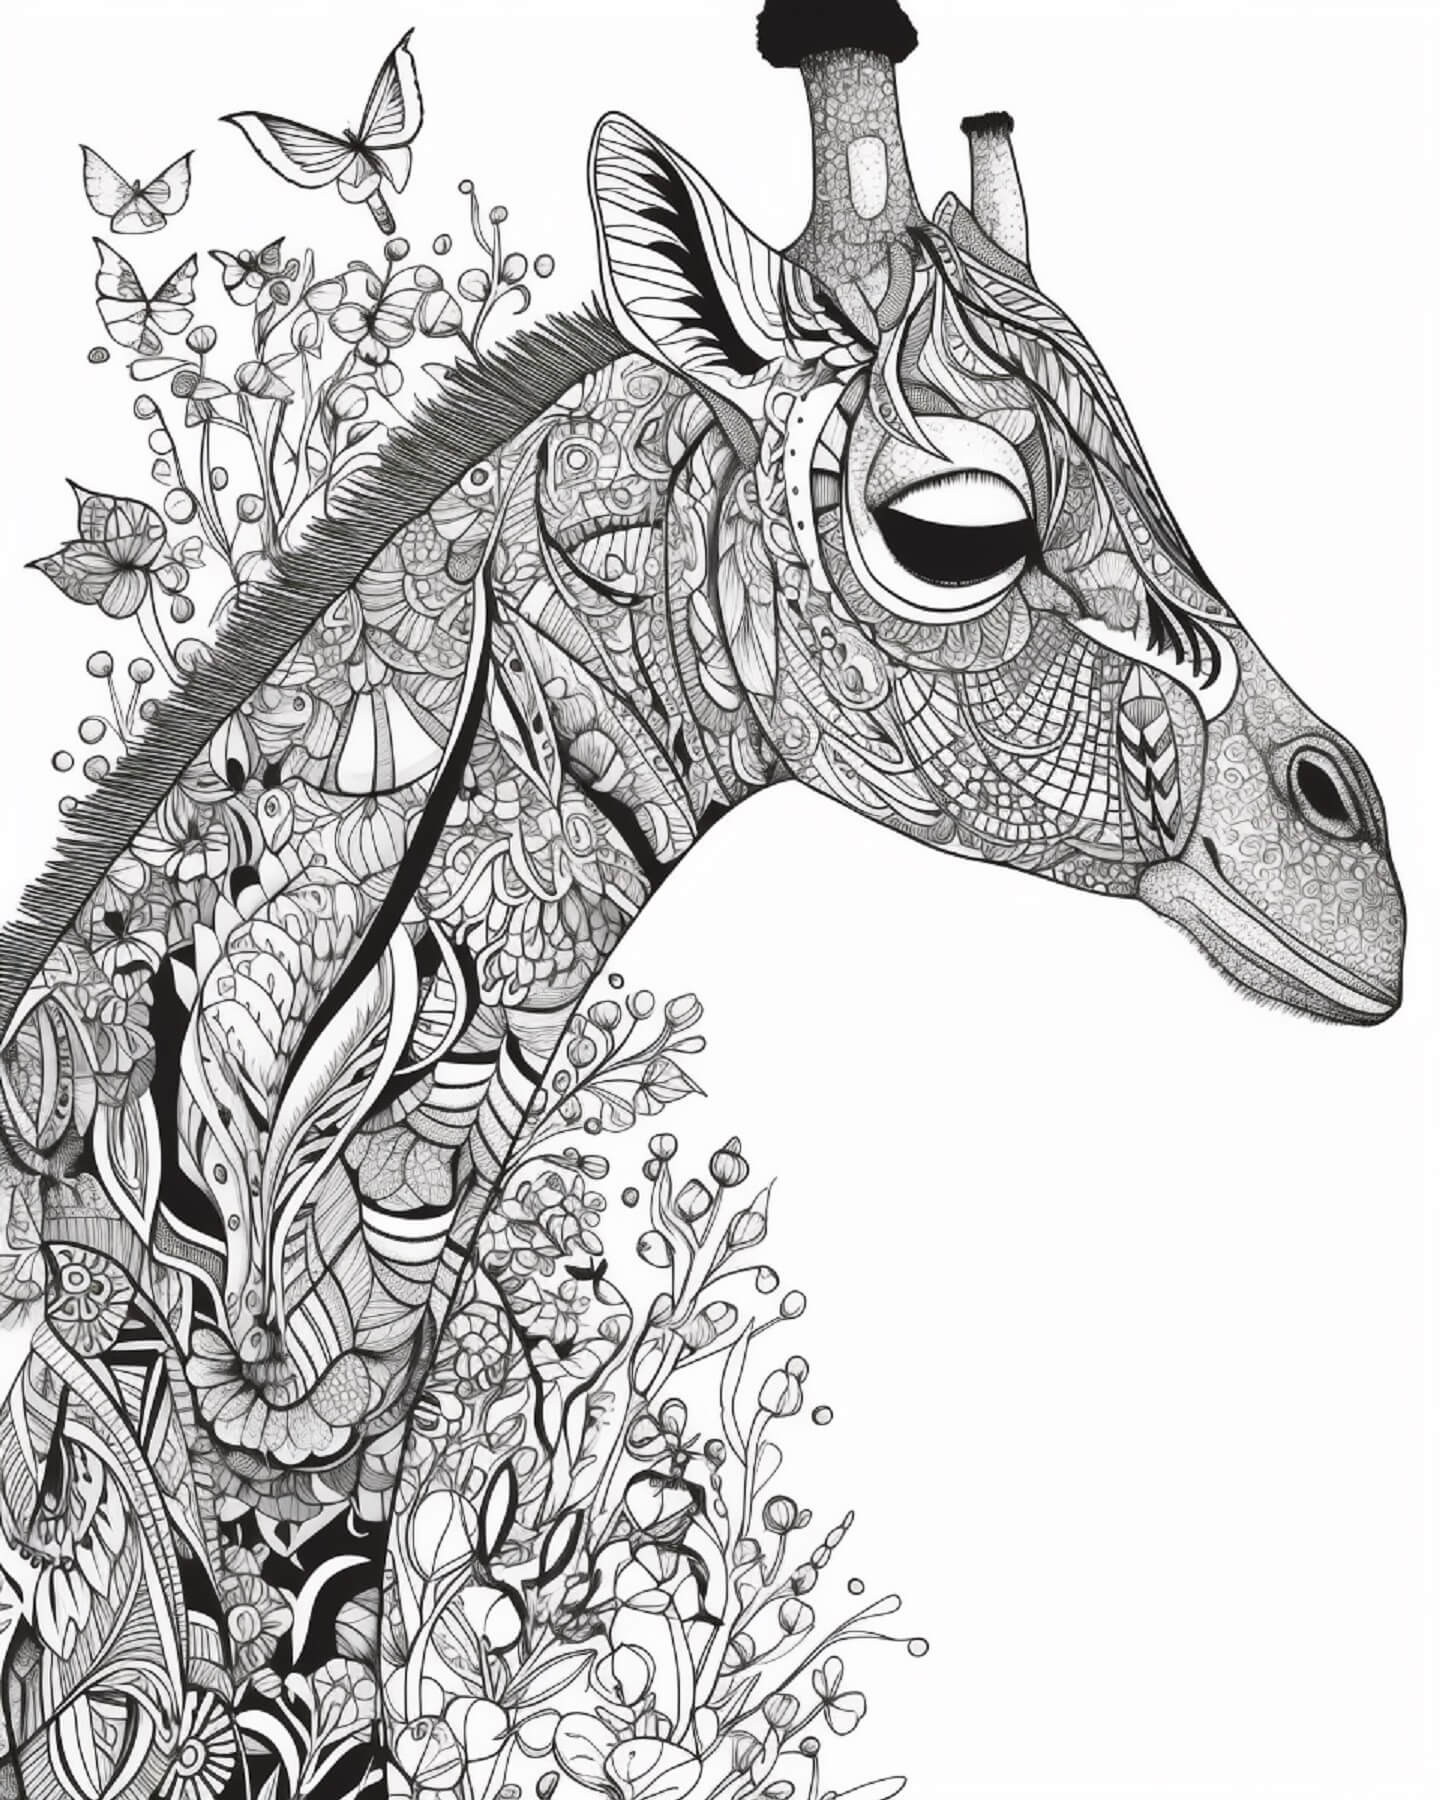 giraffe head coloring pages